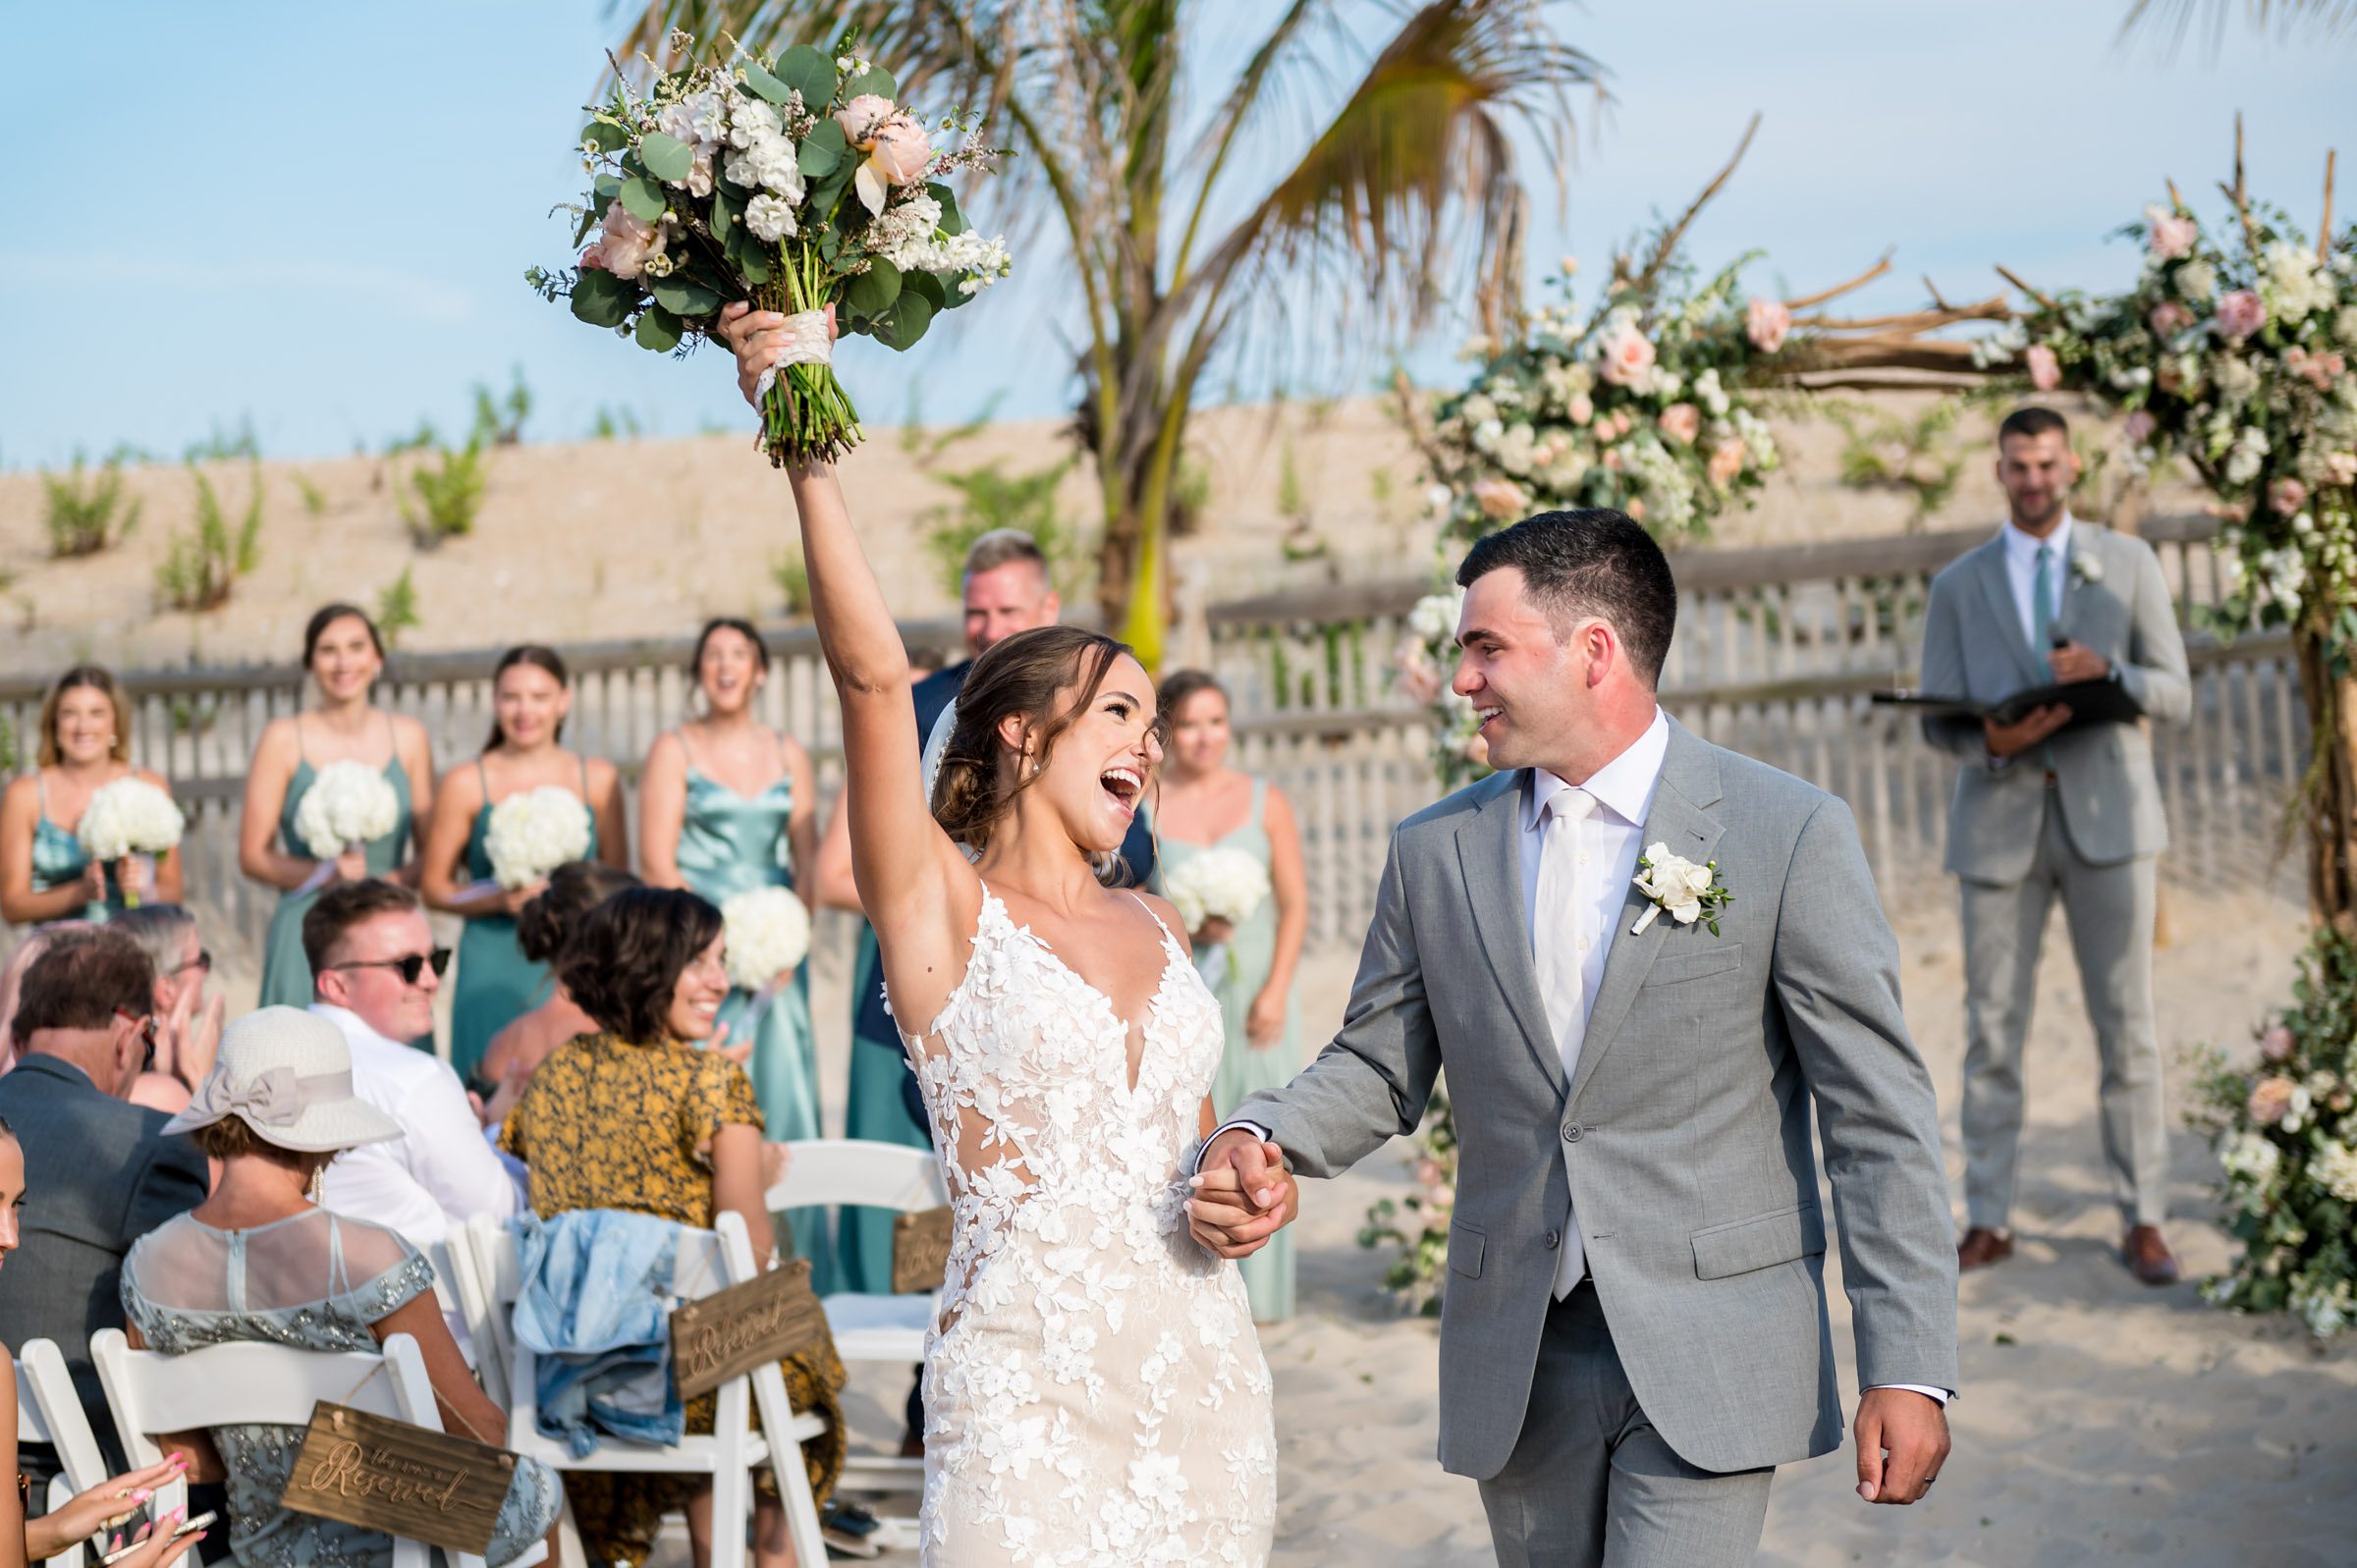 Bride and groom after their wedding ceremony on the beach at the Sea Shell Resort in Beach Haven, NJ.